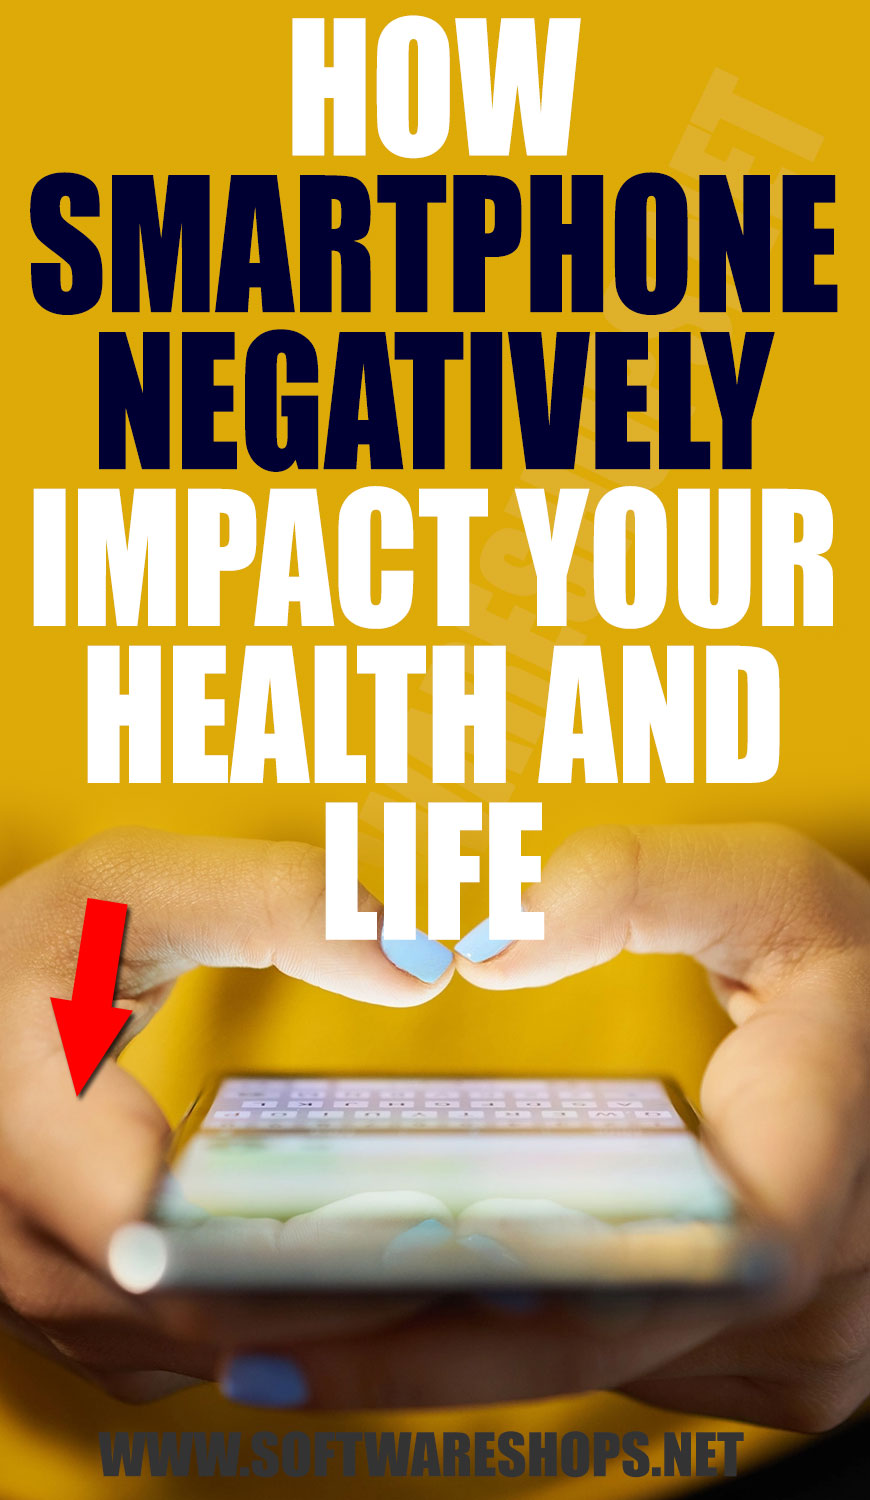 How Smartphone Negatively Impact Your Health and Life